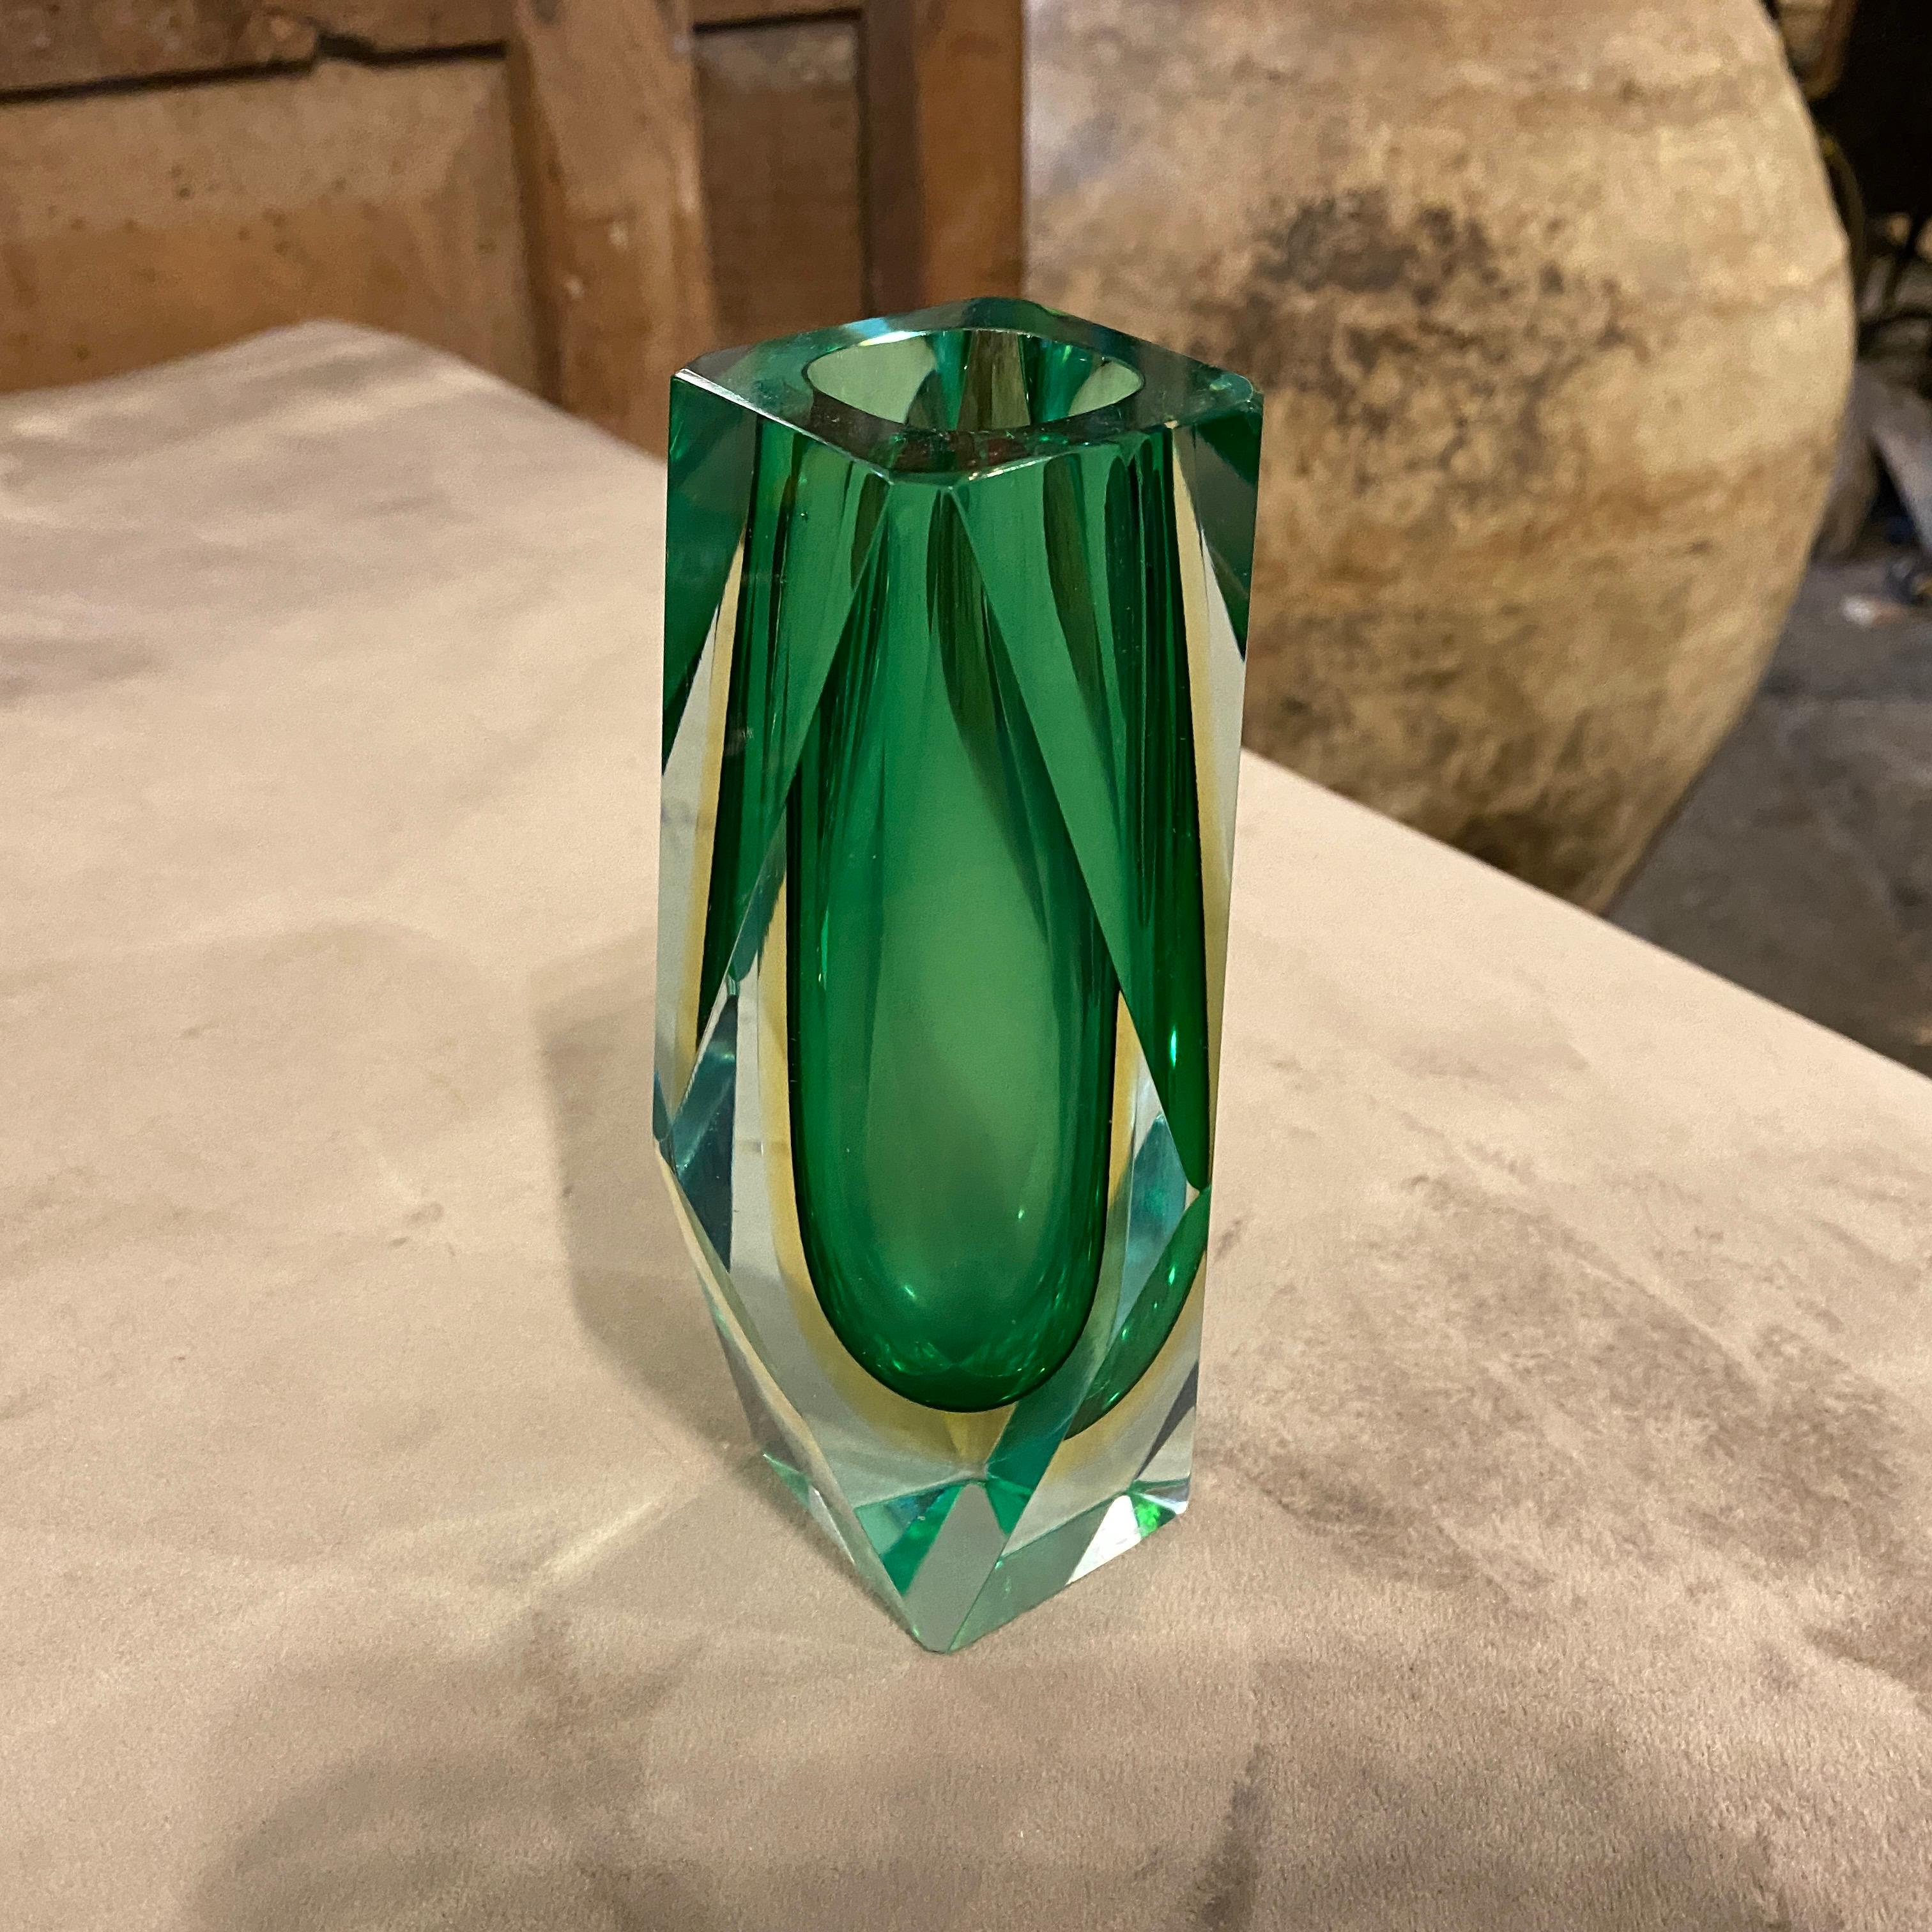 Italian 1970s Mid-Century Modern Green Faceted Murano Glass Vase by Seguso For Sale